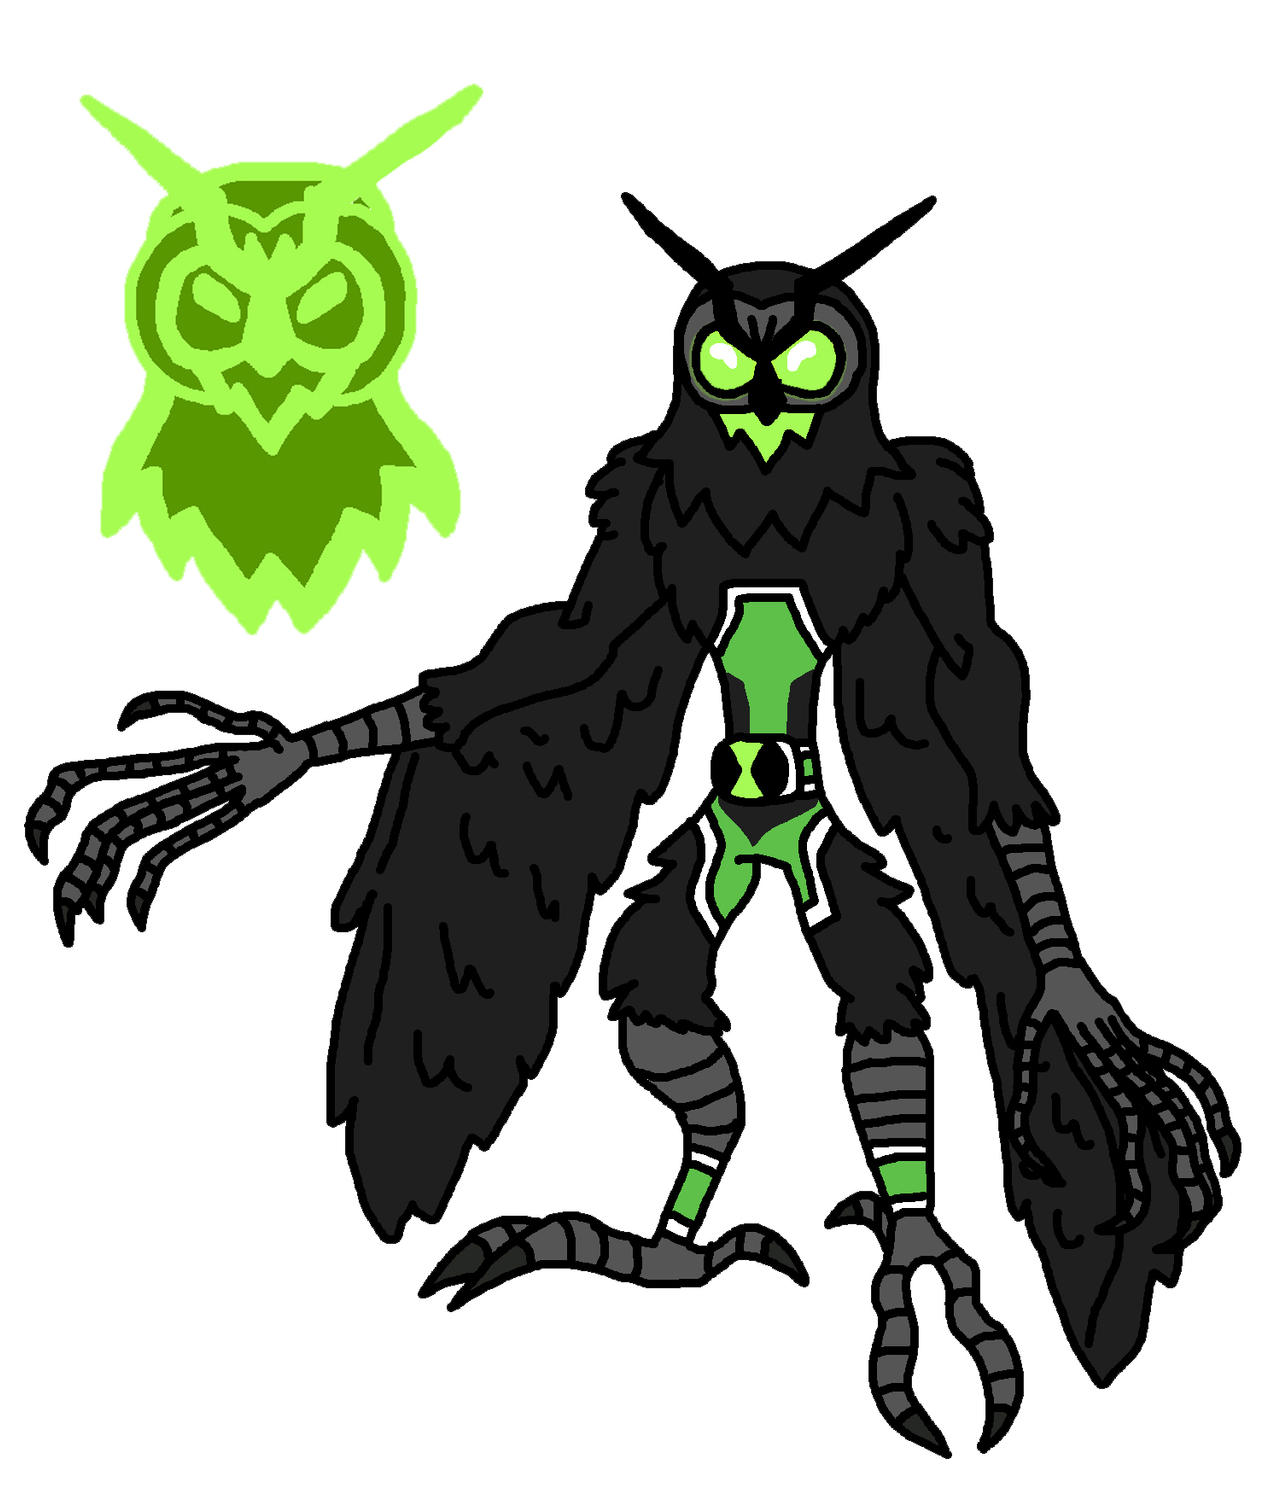 BEN 10 OMNIVERSE in THE OWL HOUSE (English Adaptation) - Ferex San